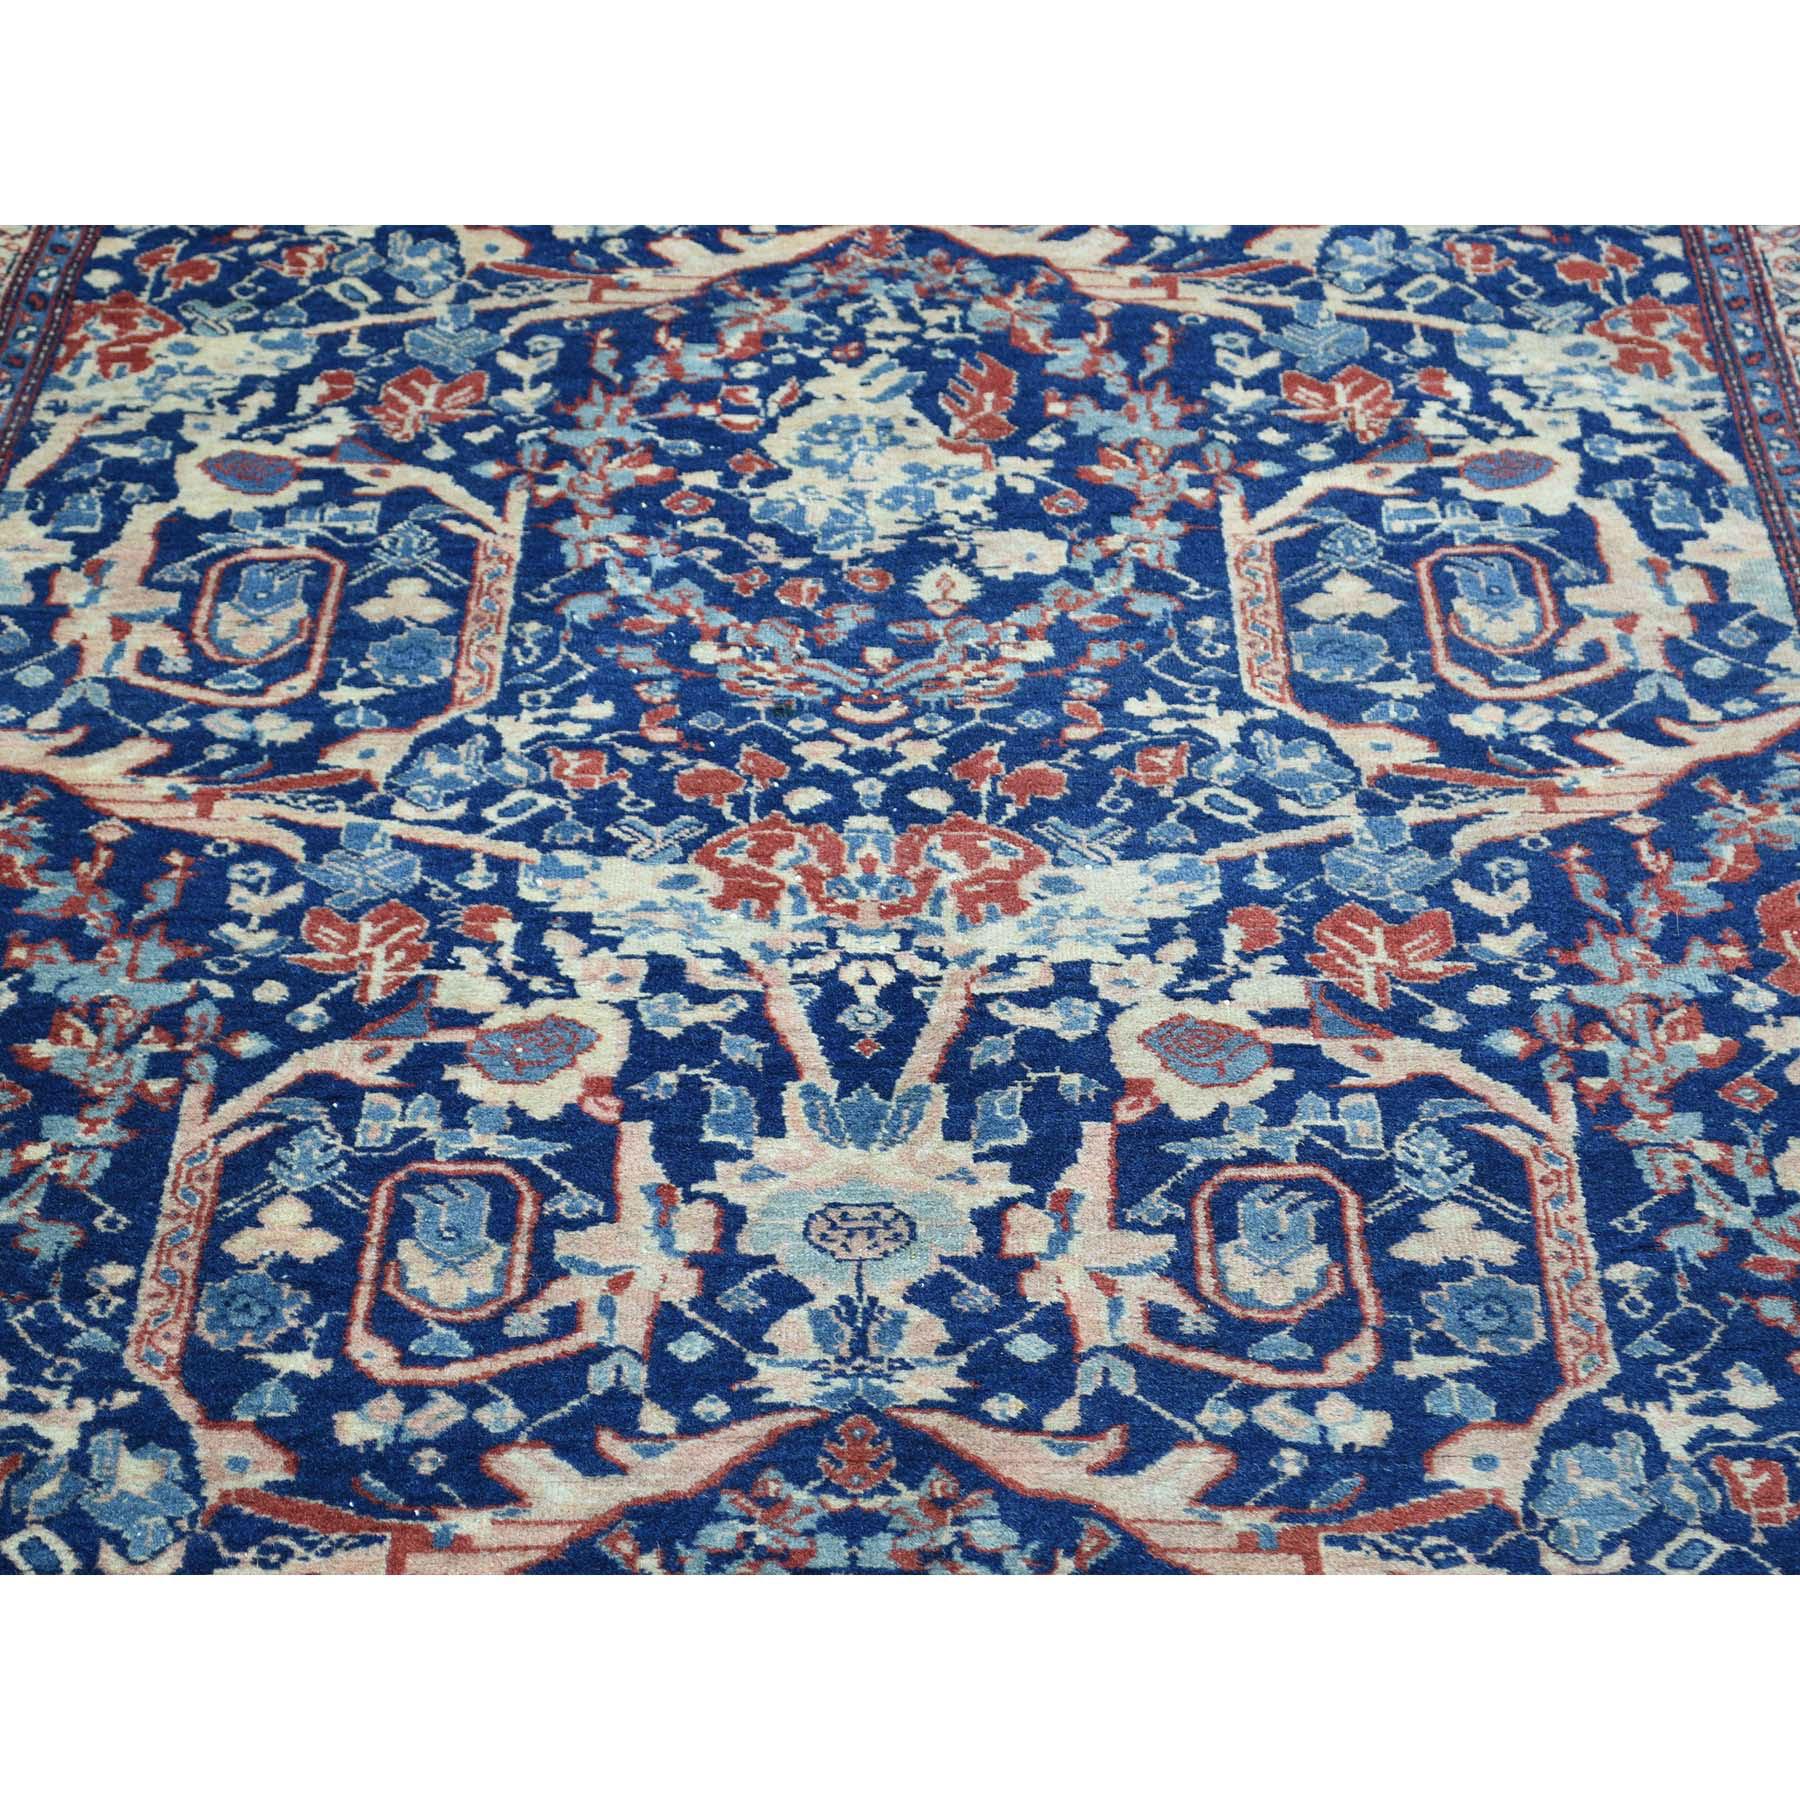 20th Century Hand-Knotted Antique Persian Tabriz Navy Blue Full Pile Rug